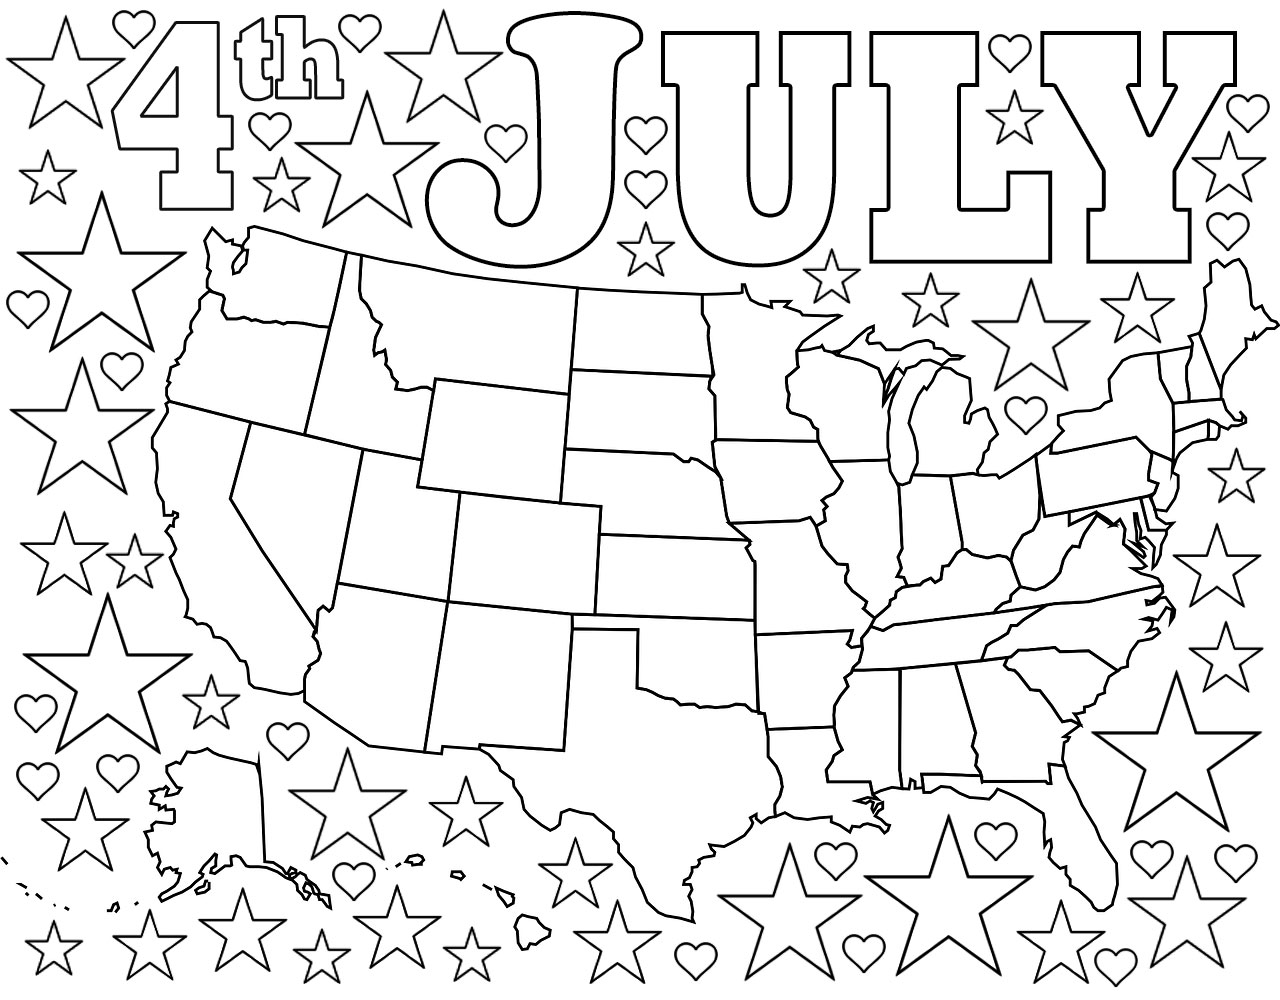 Free coloring page of a map of the USA surrounded by stars and hearts, meant for July Fourth